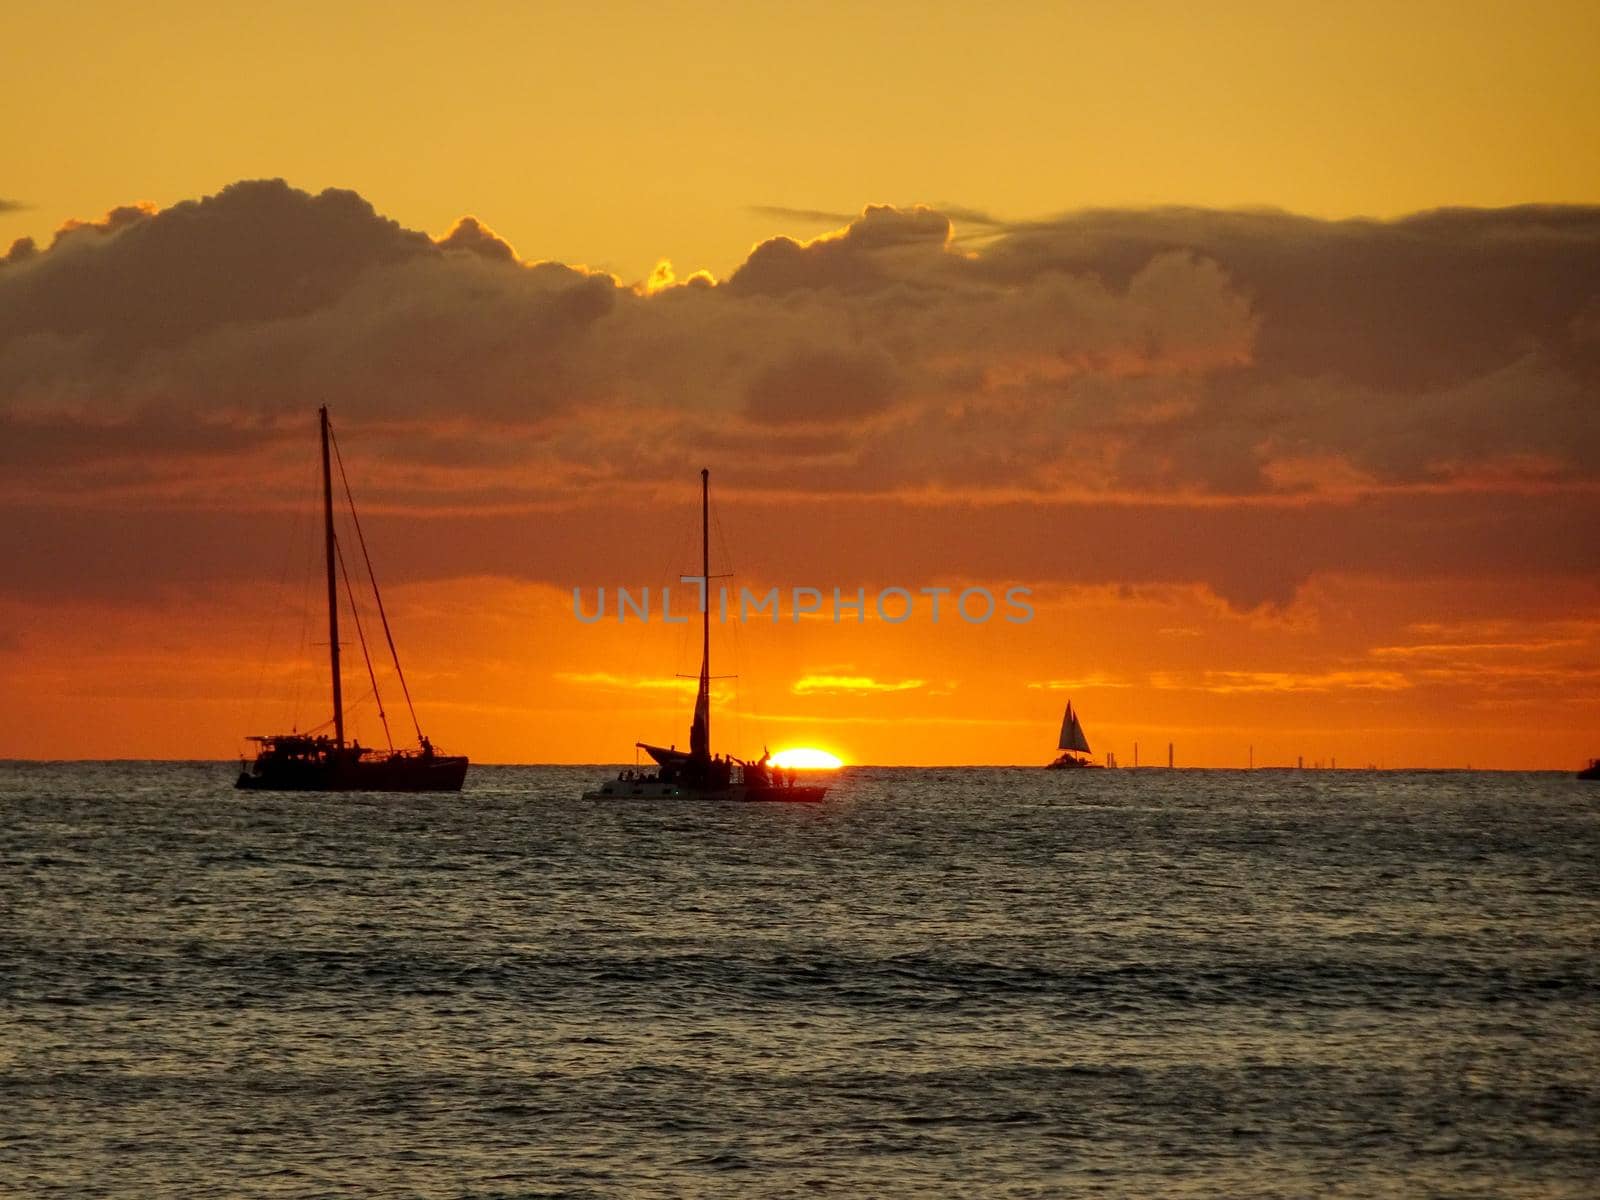 Boats on the pacific ocean waters of Waikiki at Sunset on Oahu, Hawaii.